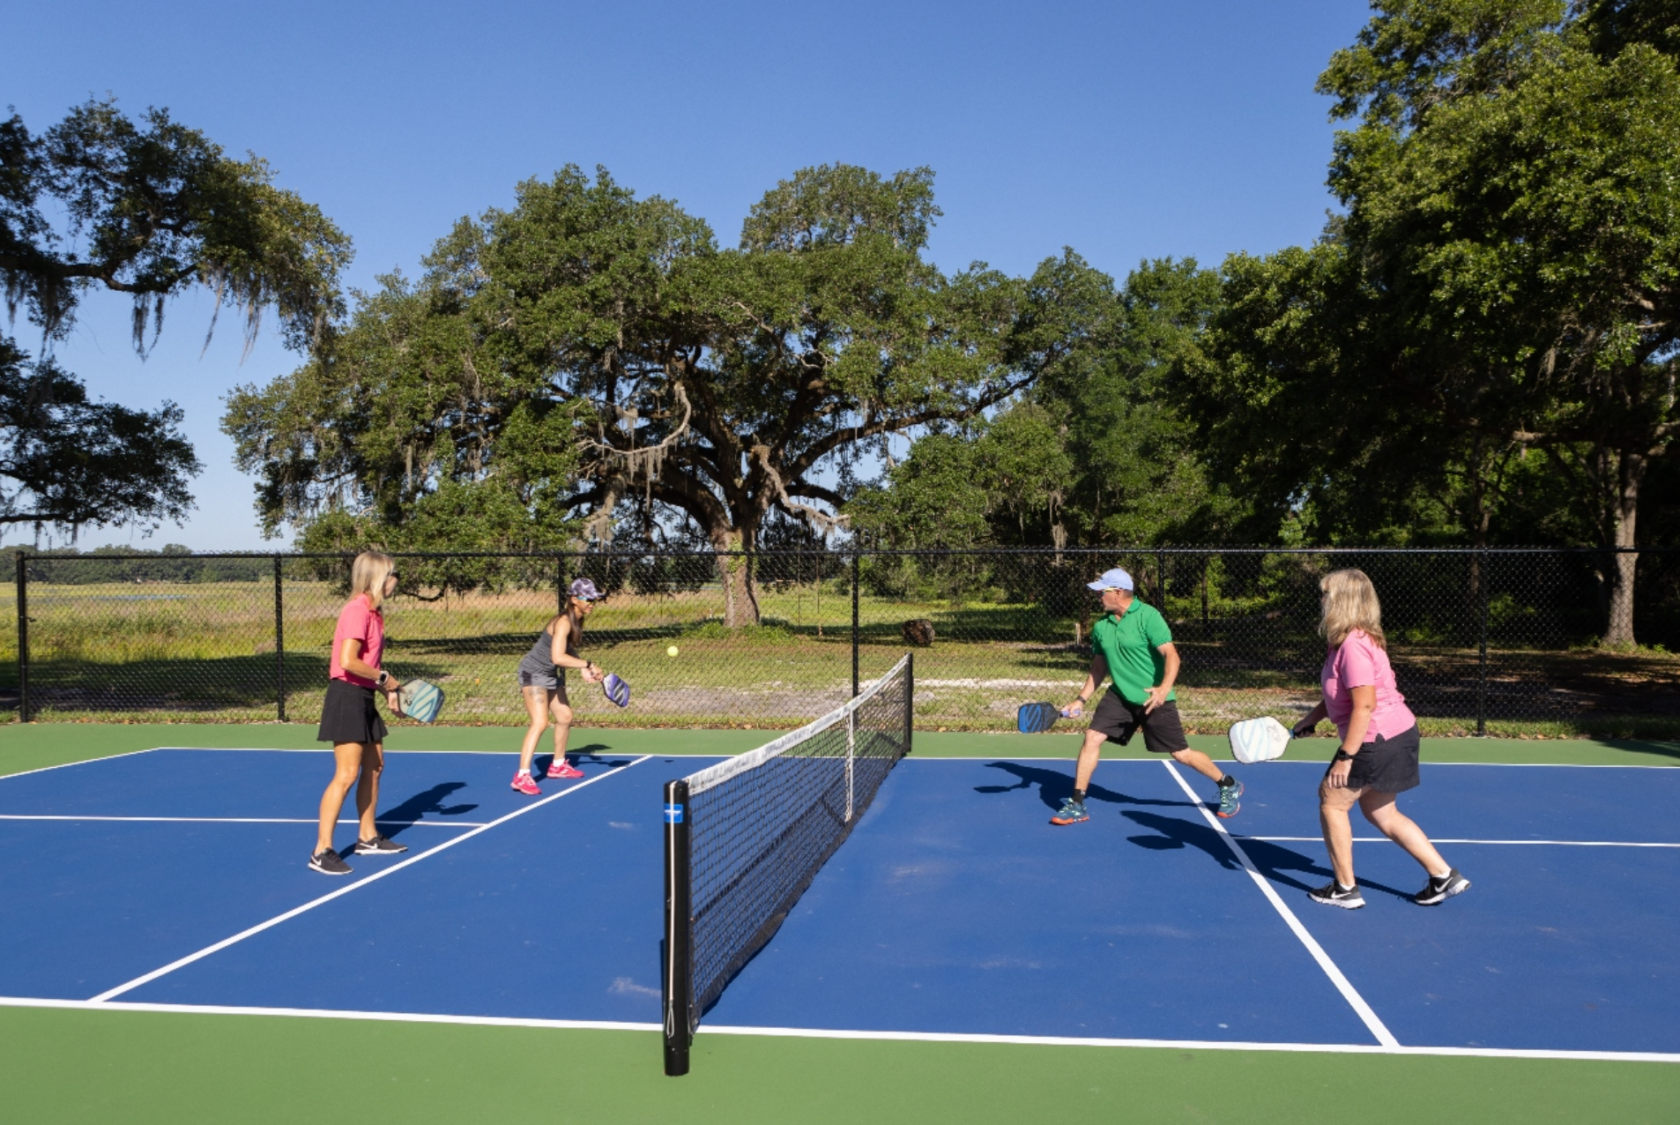 Residents playing pickleball at Simple Life in central Florida.